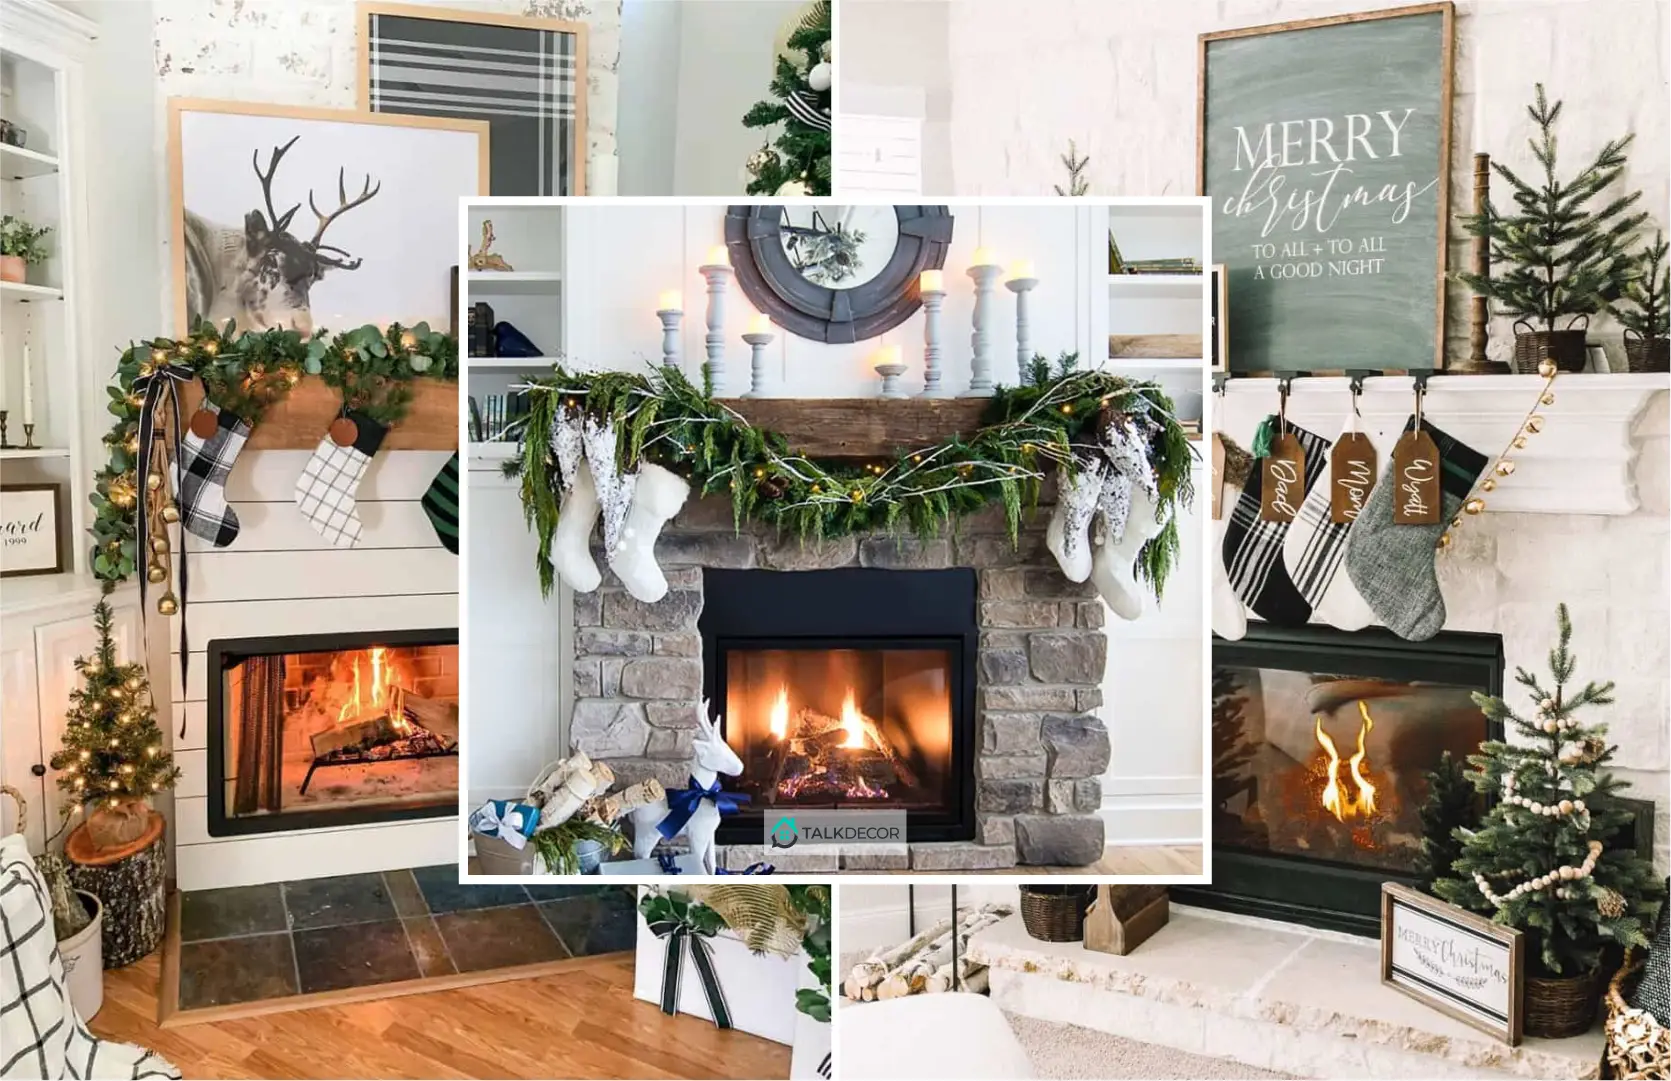 How to Make Your Fireplace Ready this Winter